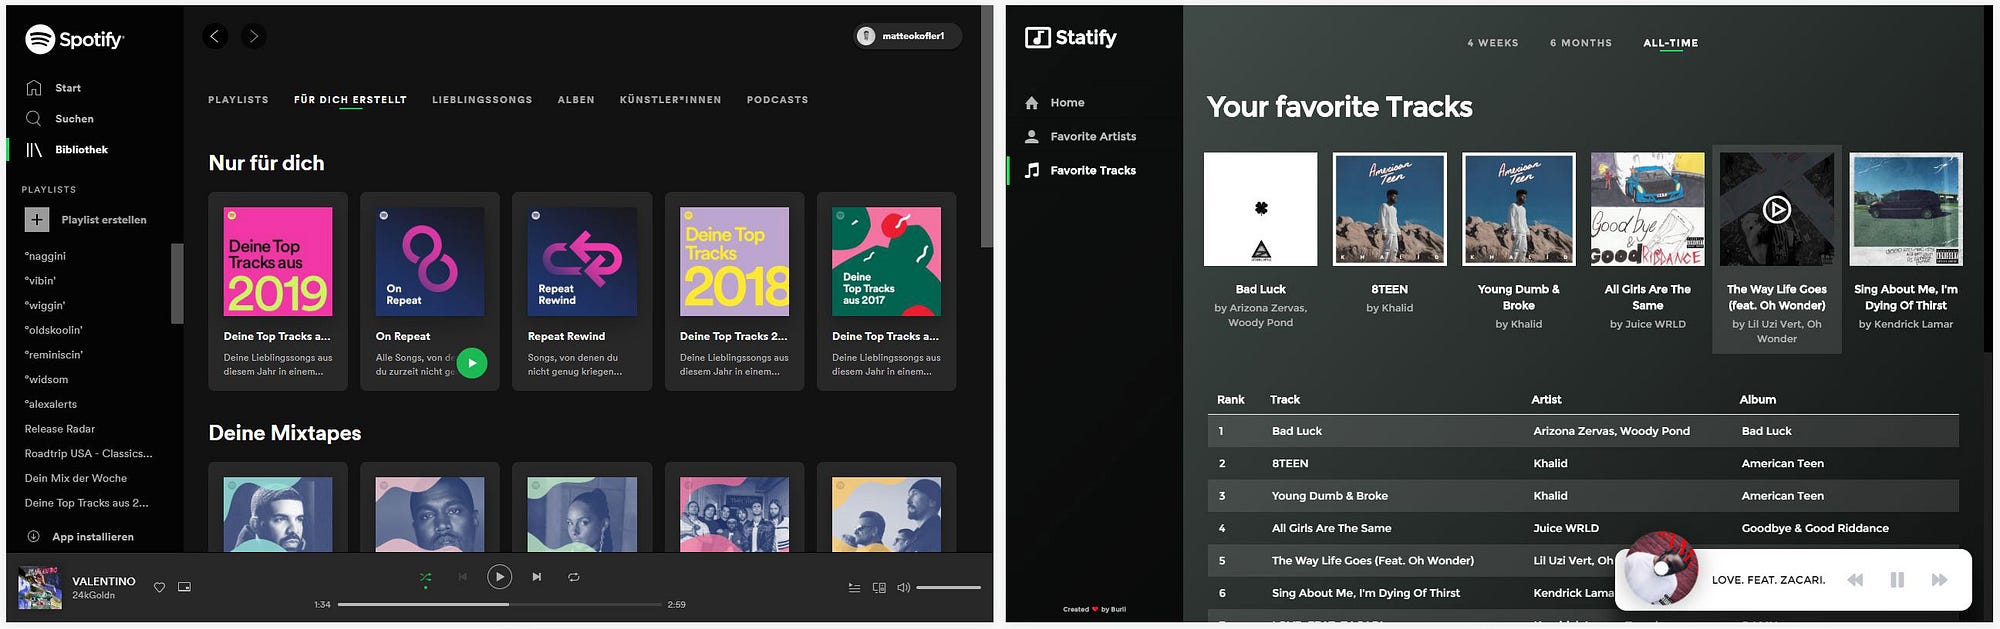 Replicating Spotify's Now Playing UI using Auto Layout - Part 1 / 2